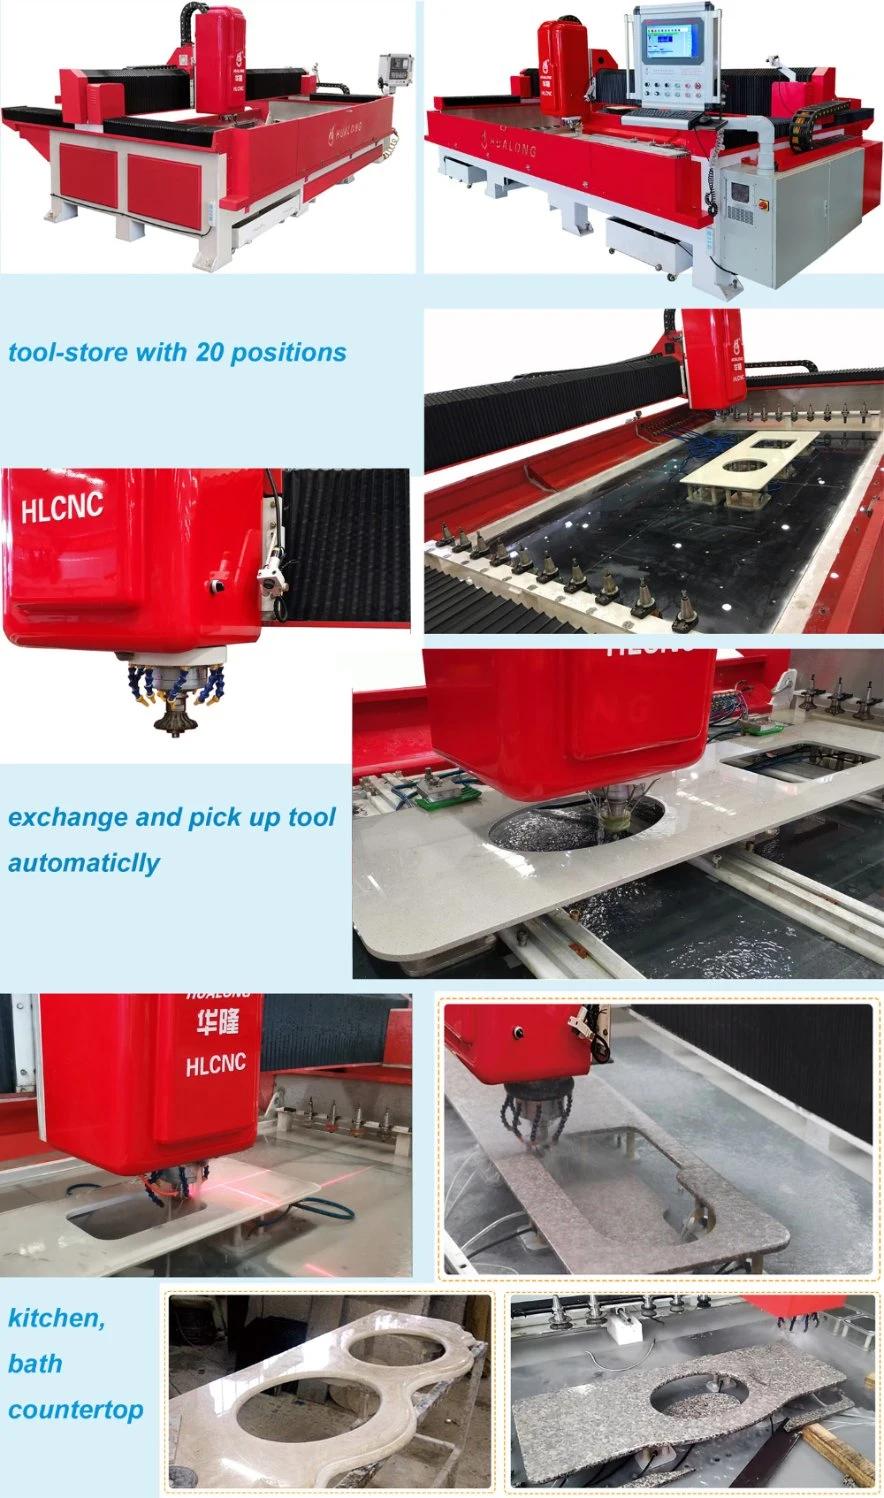 Hualong Hlcnc-3319 CNC Stone Carving Router Machine for Tiles Slab Cutting Vanity and Counter Tops Sink Cutter